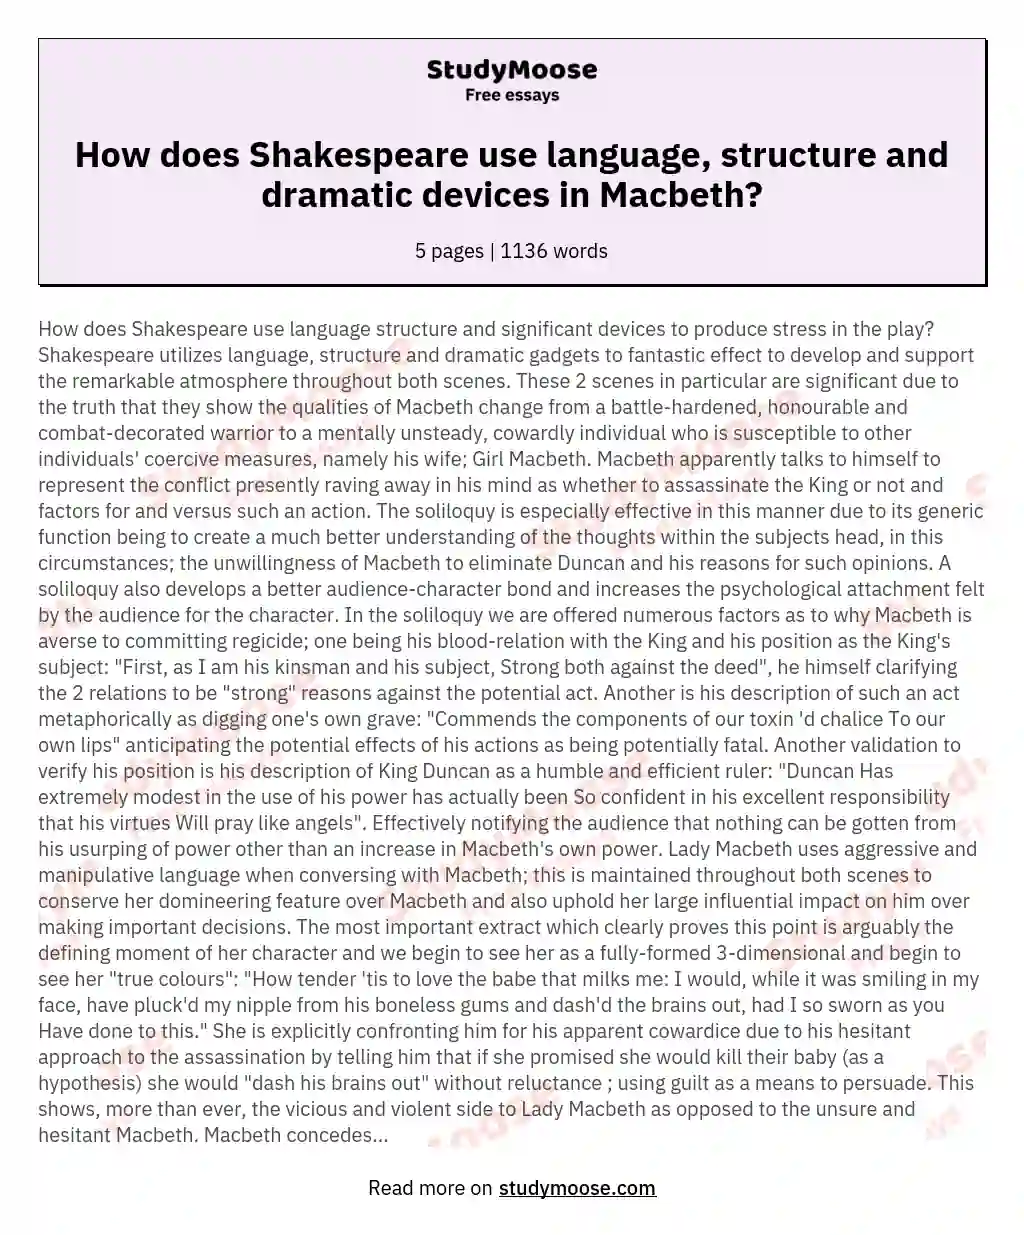 How does Shakespeare use language, structure and dramatic devices in Macbeth? essay